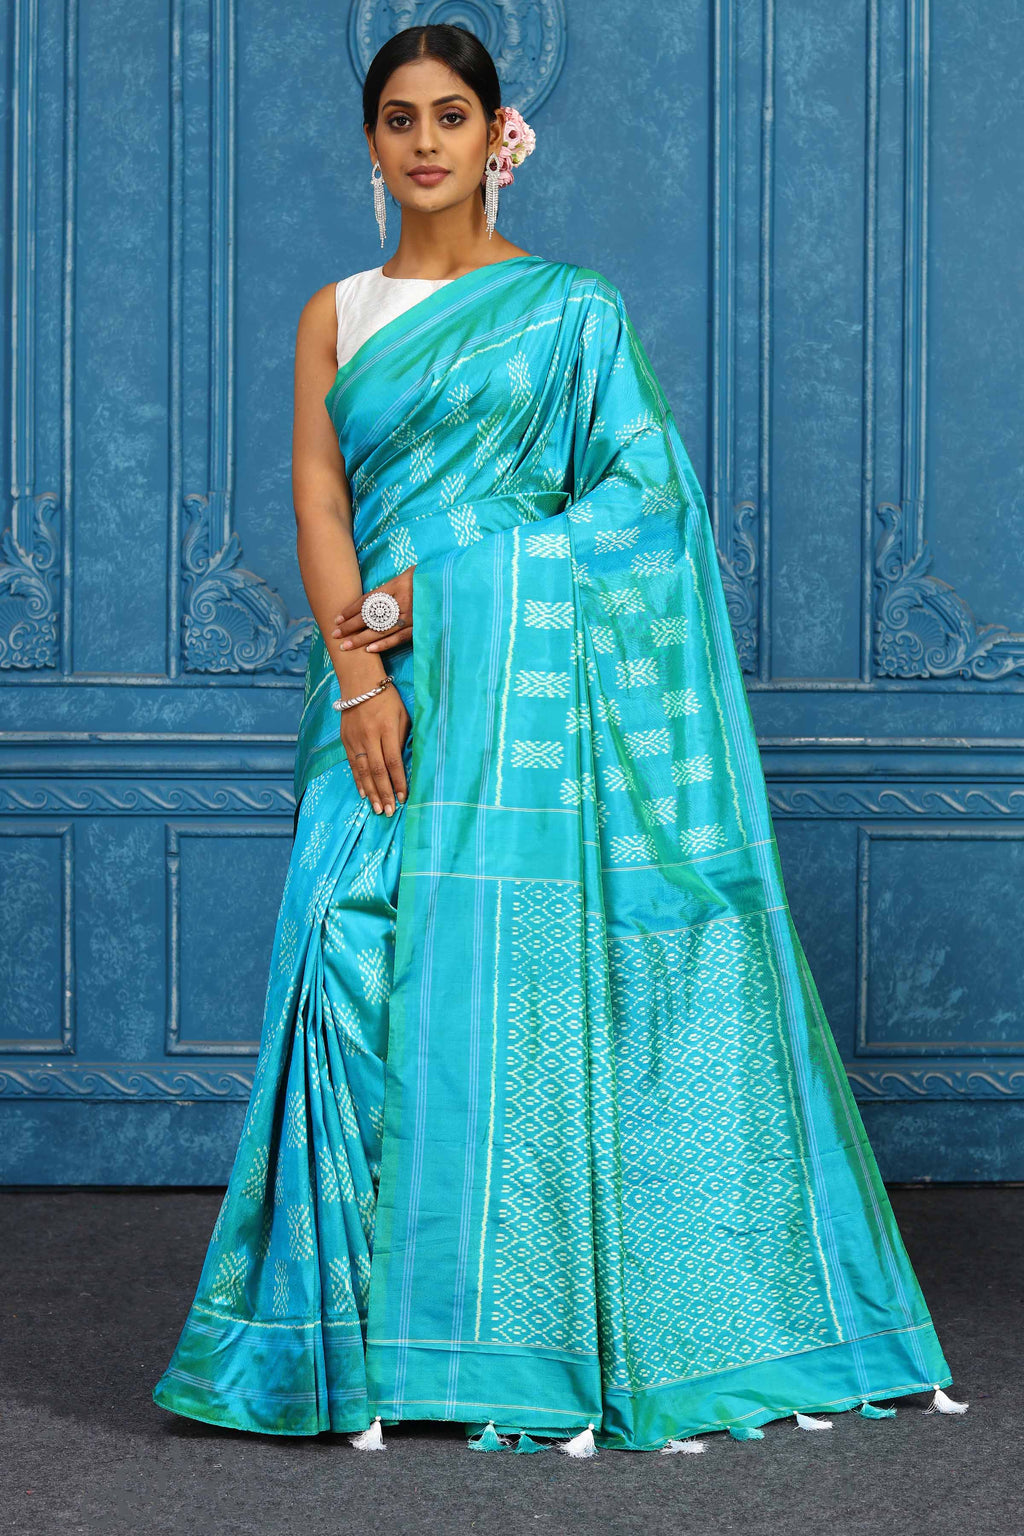 Buy stunning blue pochampally silk ikkat saree online in USA. Look your best on festive occasions in latest designer sarees, pure silk sarees, Kanchipuram sarees, handwoven sarees, tussar silk sarees, embroidered sarees from Pure Elegance Indian clothing store in USA.-full view